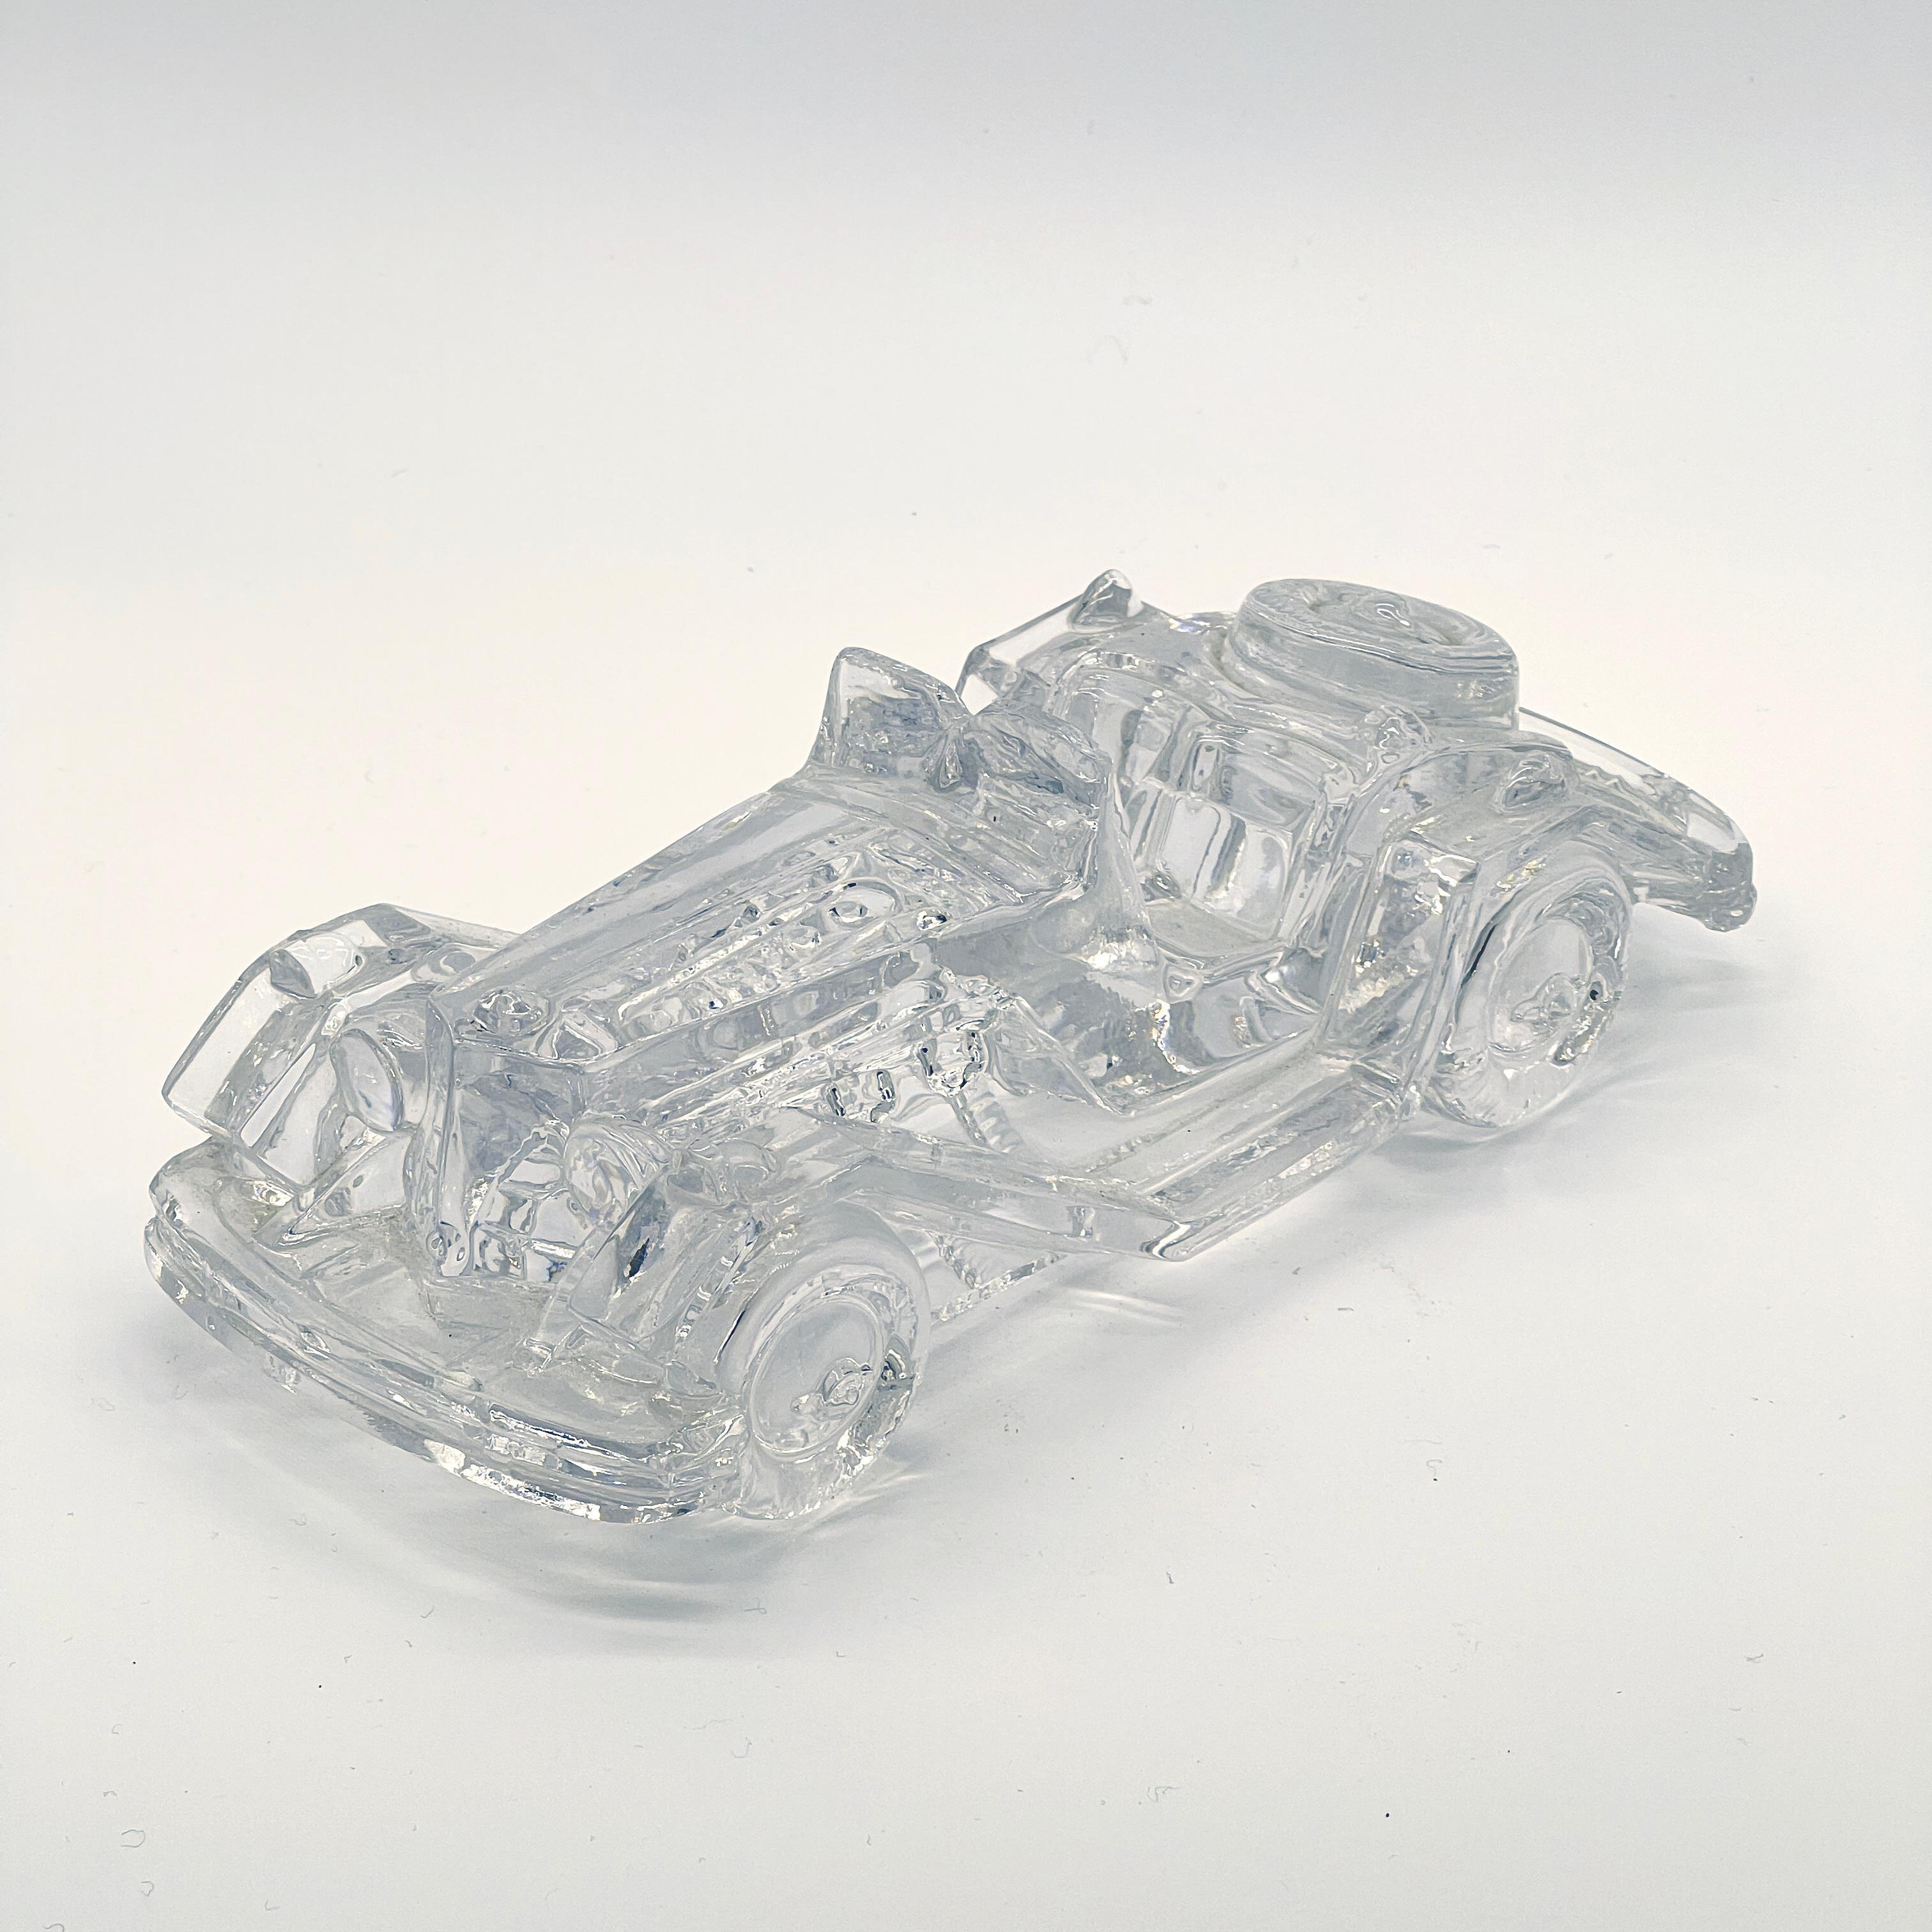 Vintage Clear Crystal Mg Roadster Decorative Model Car / Paperweight In Good Condition For Sale In Milano, IT